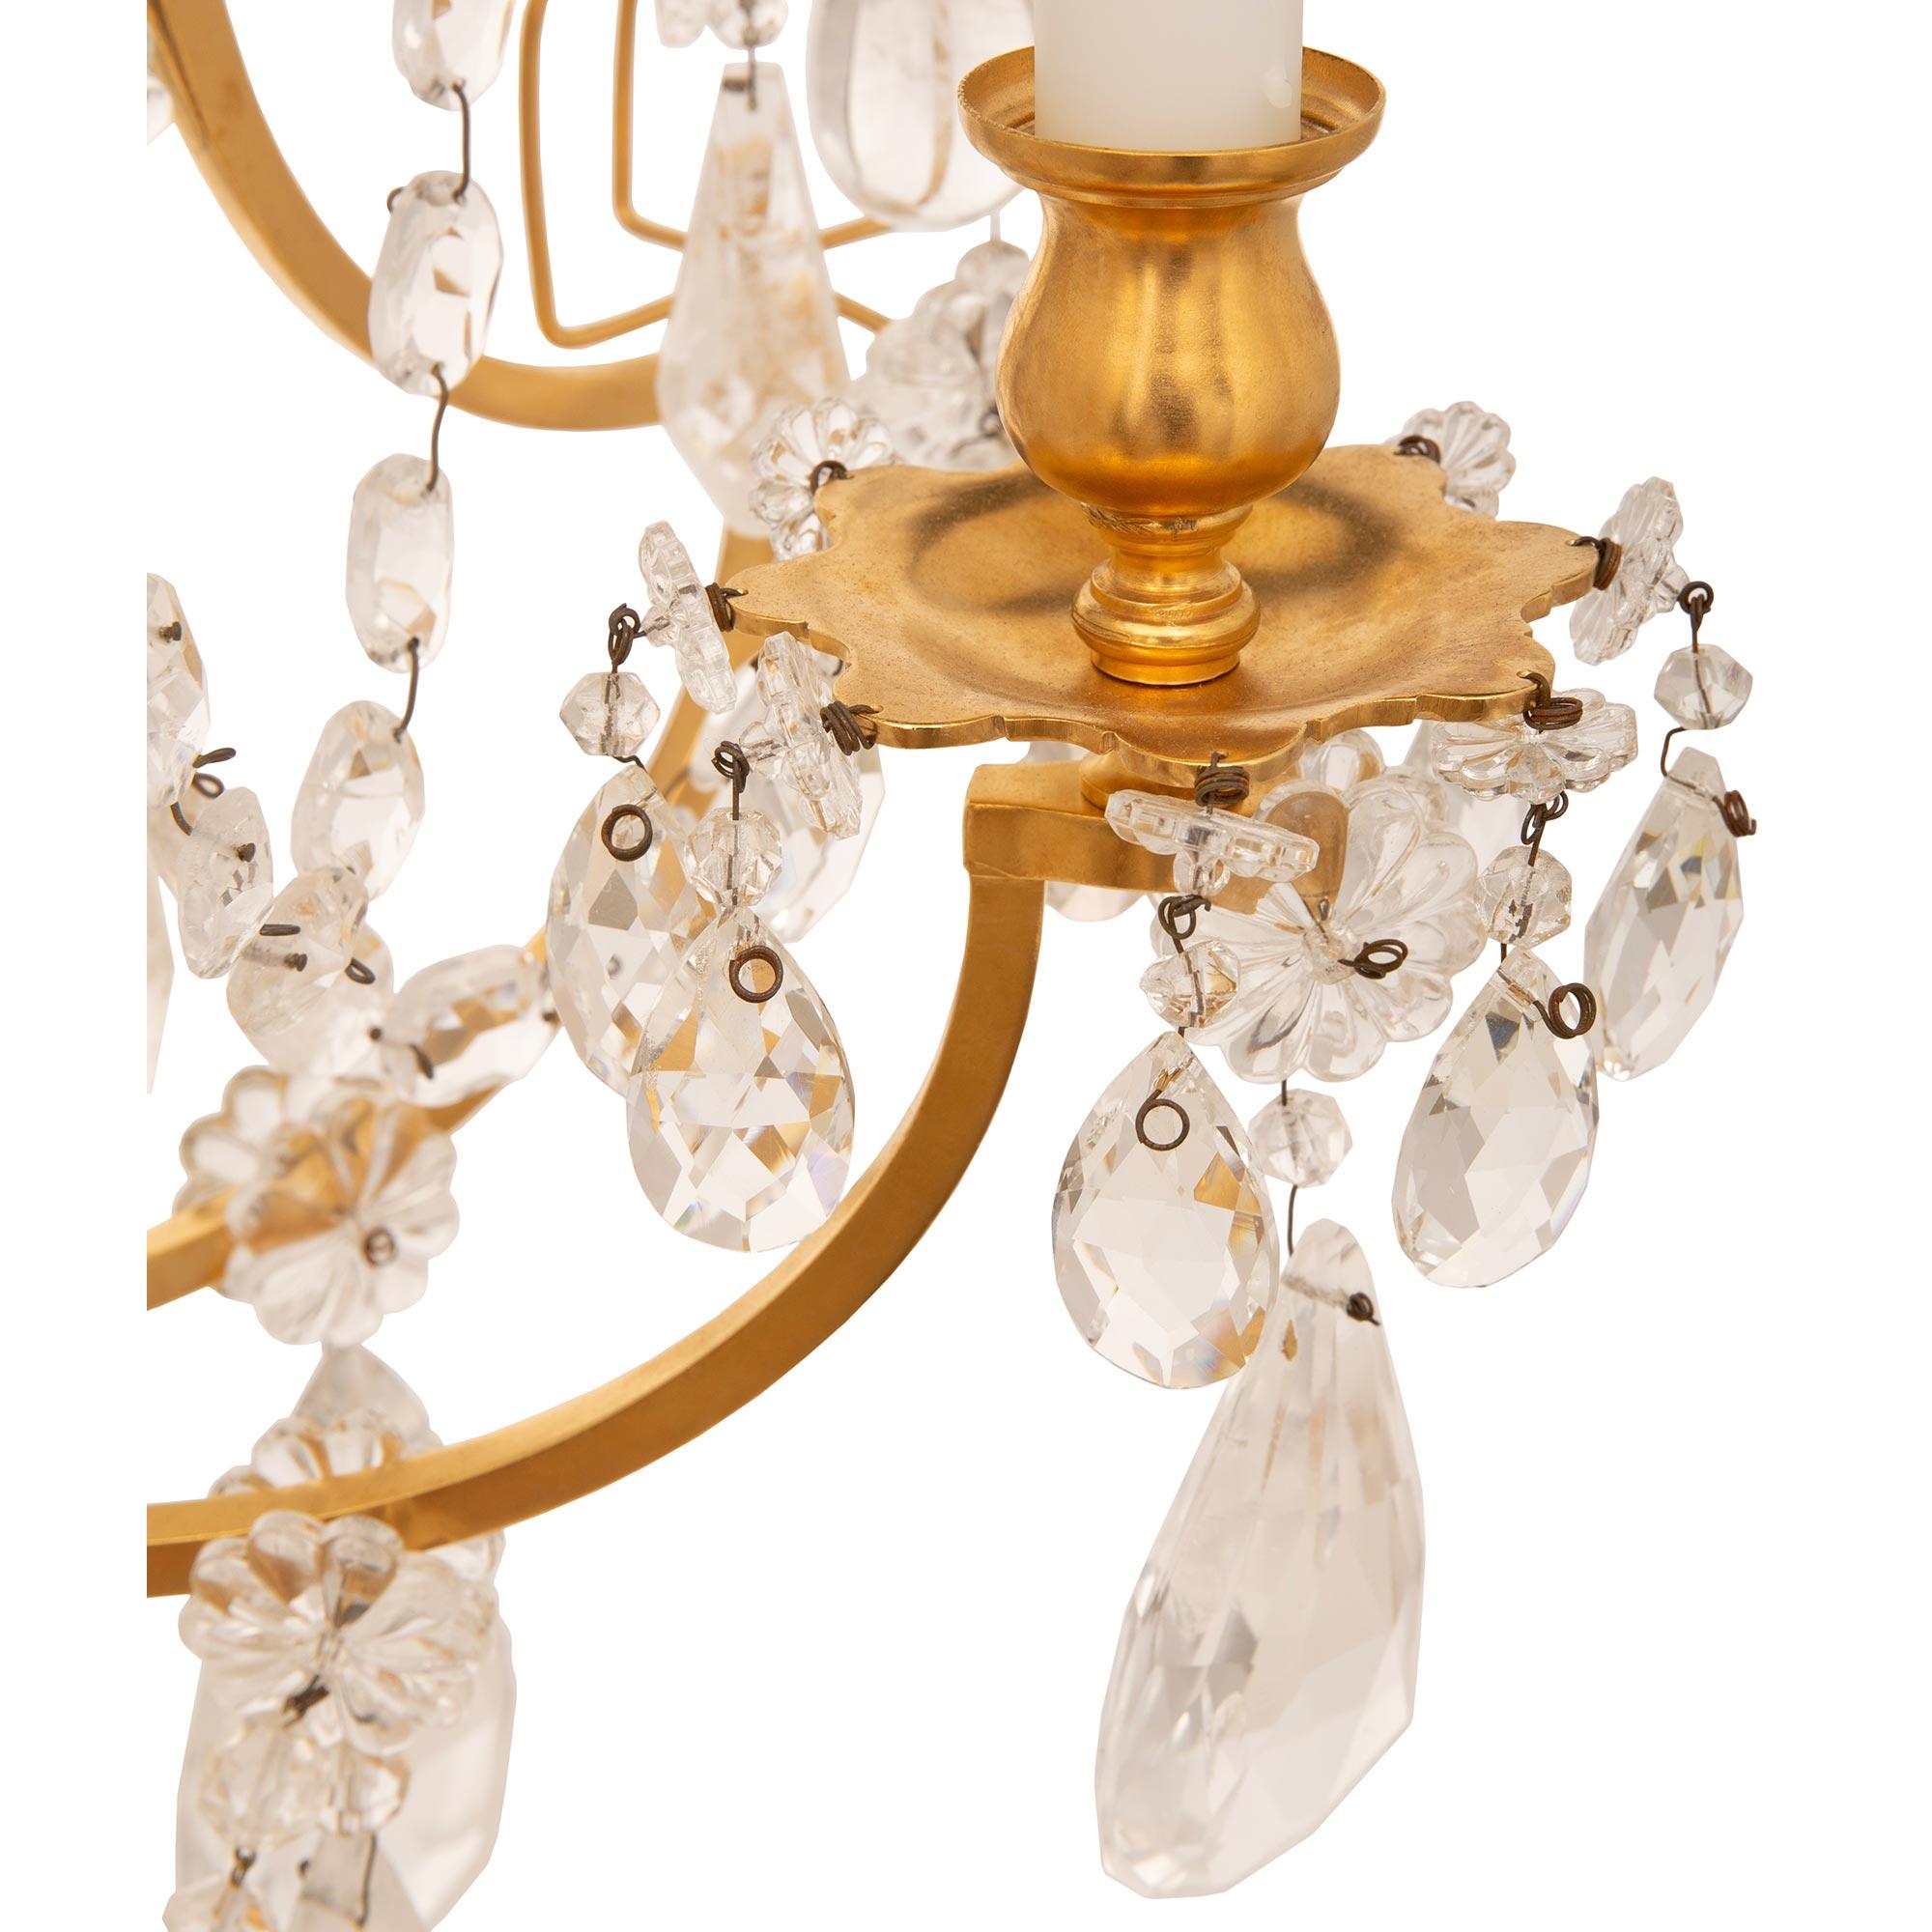 Pair Of French 19th Century Louis XVI St. Rock Crystal & Ormolu Girondoles Lamp For Sale 2